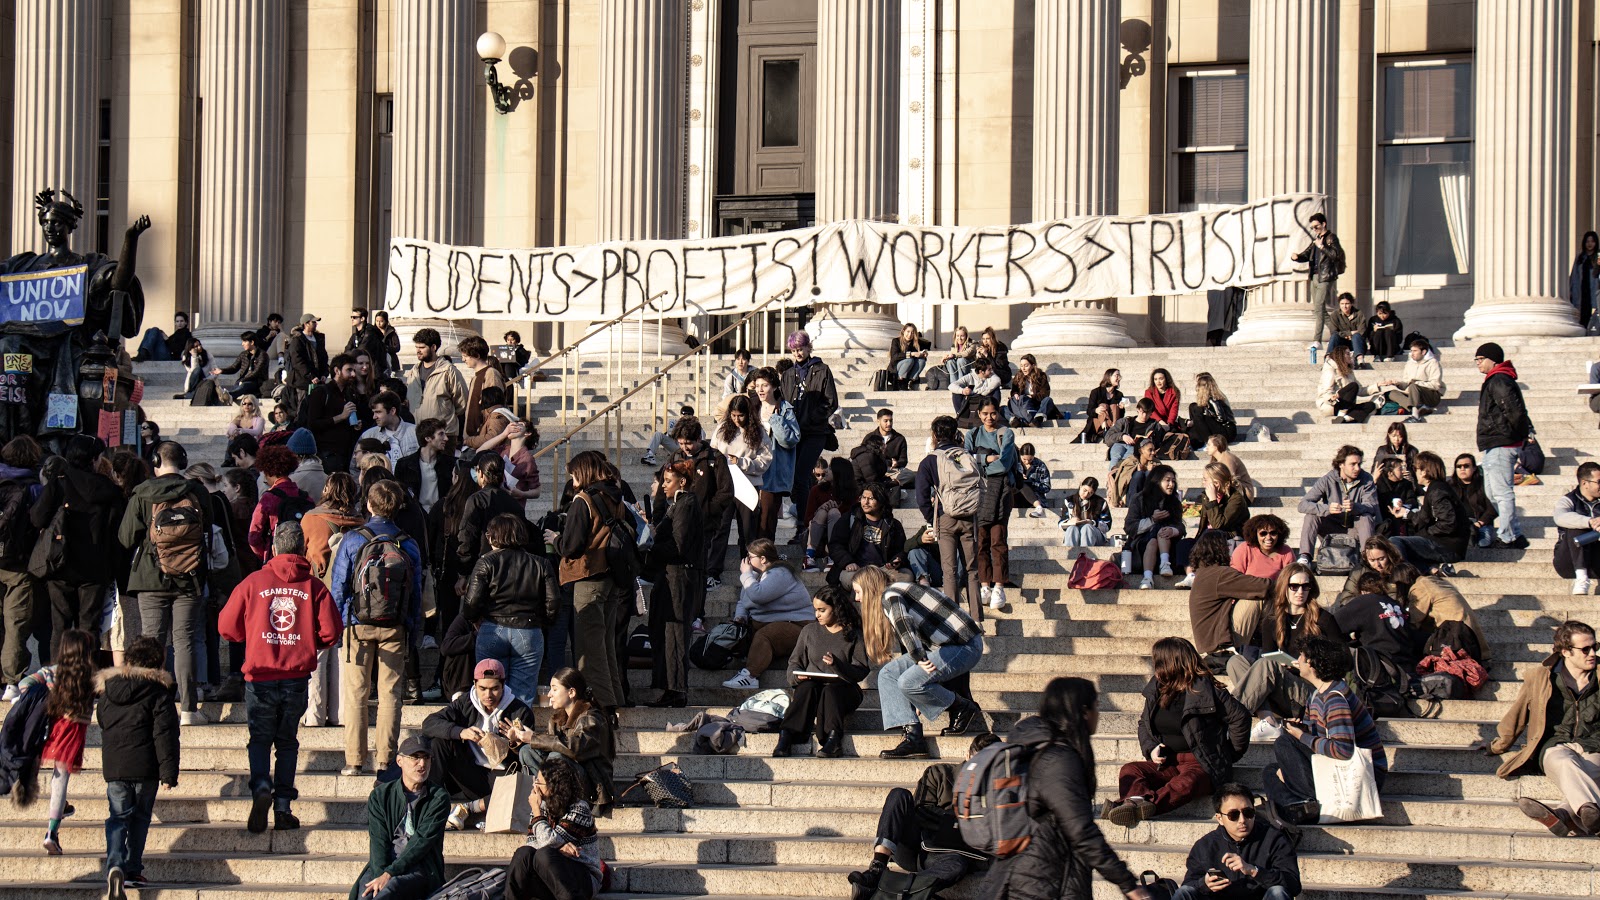 A large crowd of students is pictured on the steps of a library that is supported by large white pillars. Tied to the pillars is a large, canvas banner that says, in all capital letters, “Students > Profits! Workers > Trustees!” in black letters.